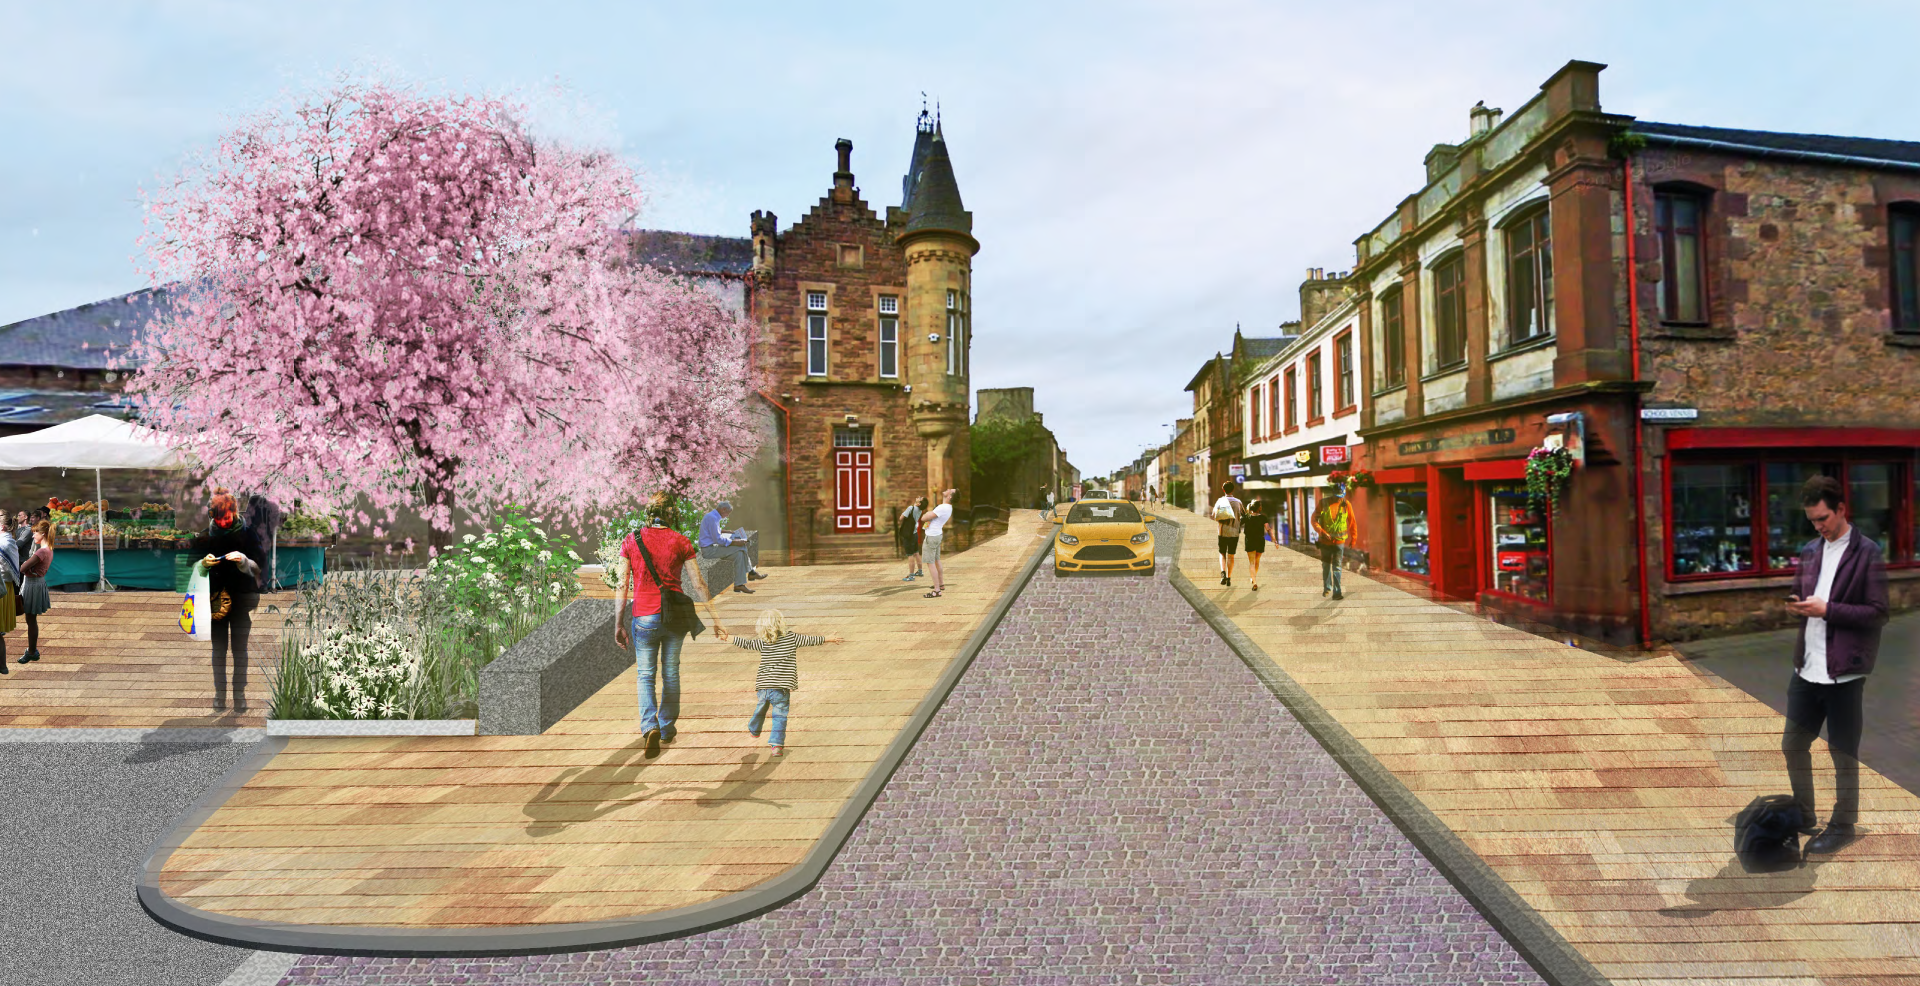 Maybole Restoration Project celebrates £7.5m funding boost with new website launch